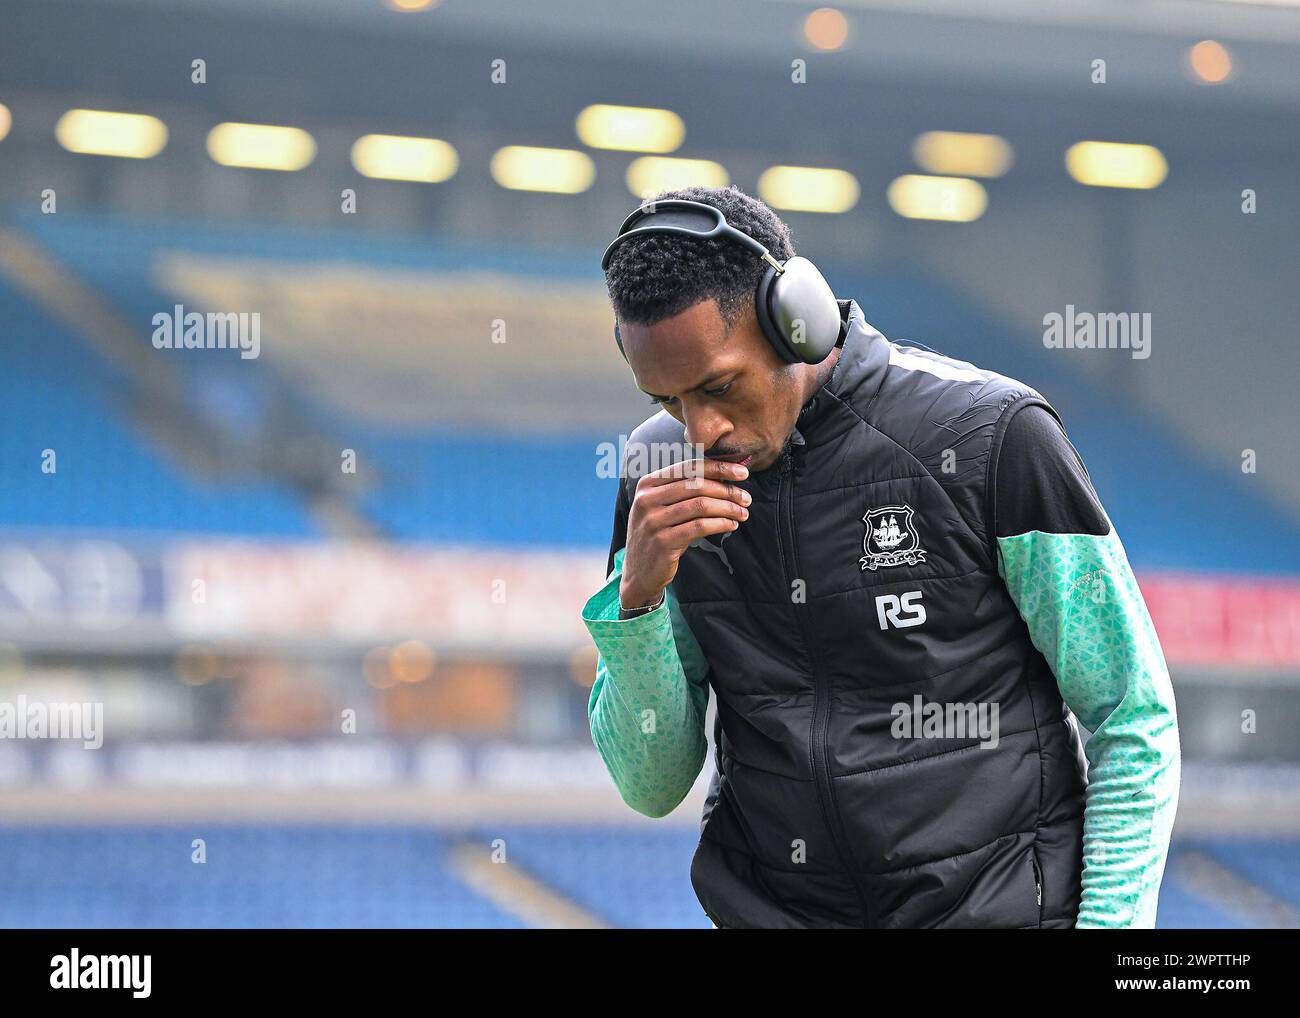 Mickel Miller of Plymouth Argyle arrives during the Sky Bet Championship match Blackburn Rovers vs Plymouth Argyle at Ewood Park, Blackburn, United Kingdom, 9th March 2024 (Photo by Stan Kasala/News Images) in, on 3/9/2024. (Photo by Stan Kasala/News Images/Sipa USA) Credit: Sipa USA/Alamy Live News Stock Photo